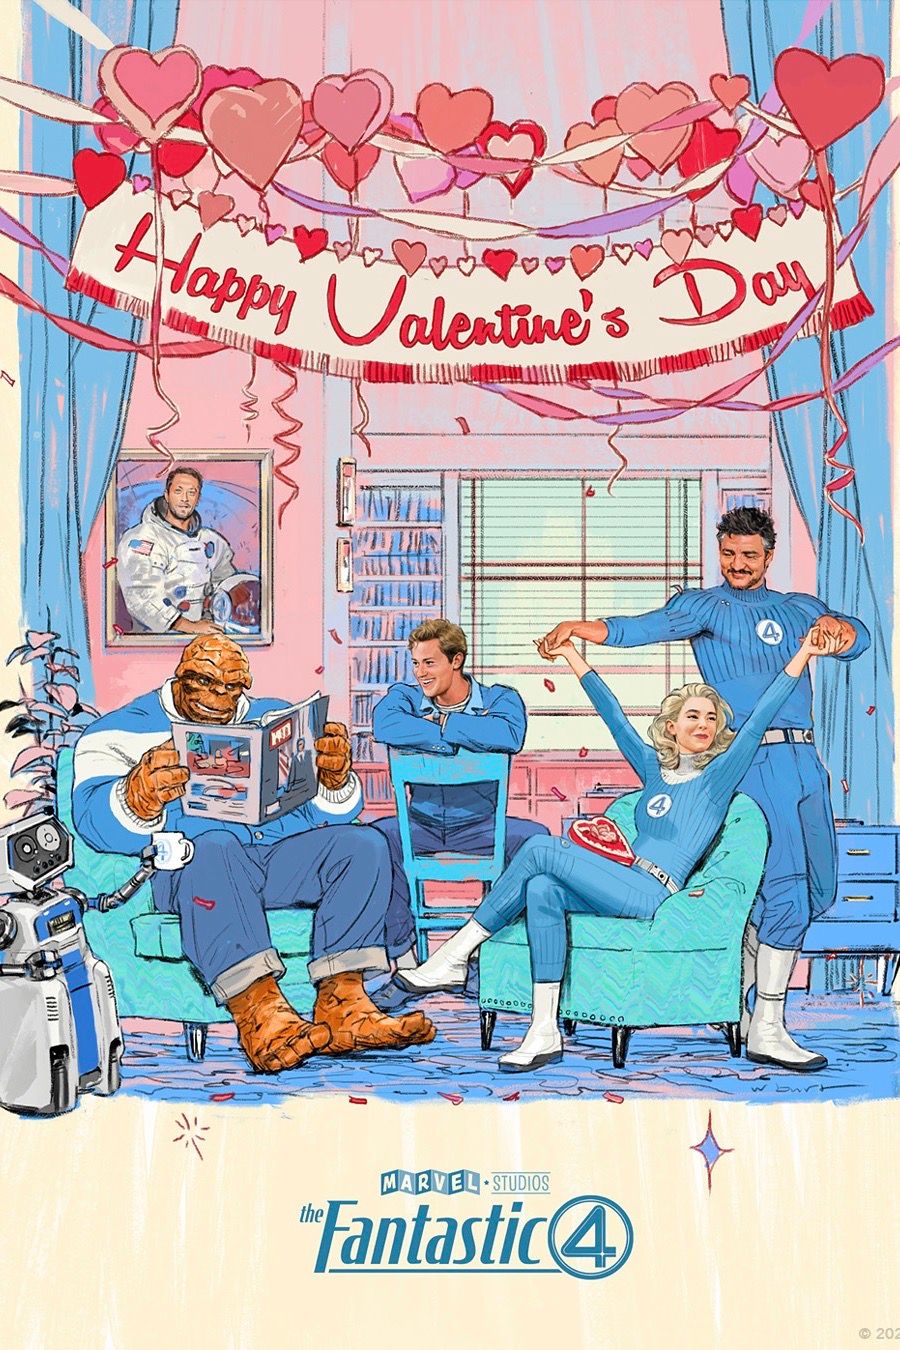 Fantastic Four Valentine's Day Poster 2025 with Pedro Pascal, Vanessa Kirby, Ebon Moss-Bachrach and Joseph Quinn